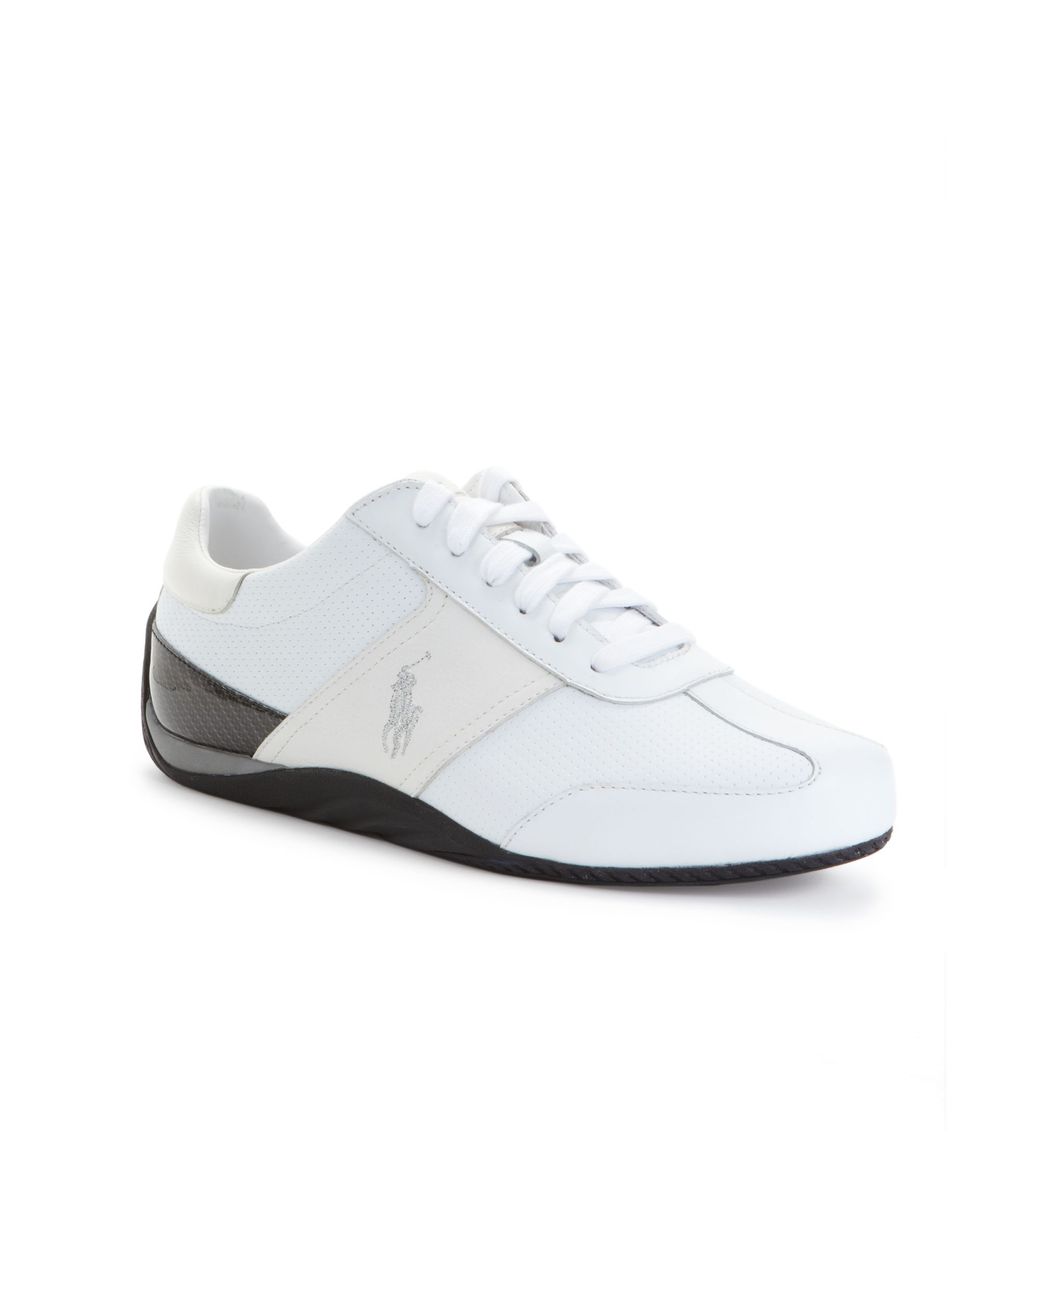 Polo Ralph Lauren Little Boys Sayer Casual Sneakers from Finish Line |  Dulles Town Center